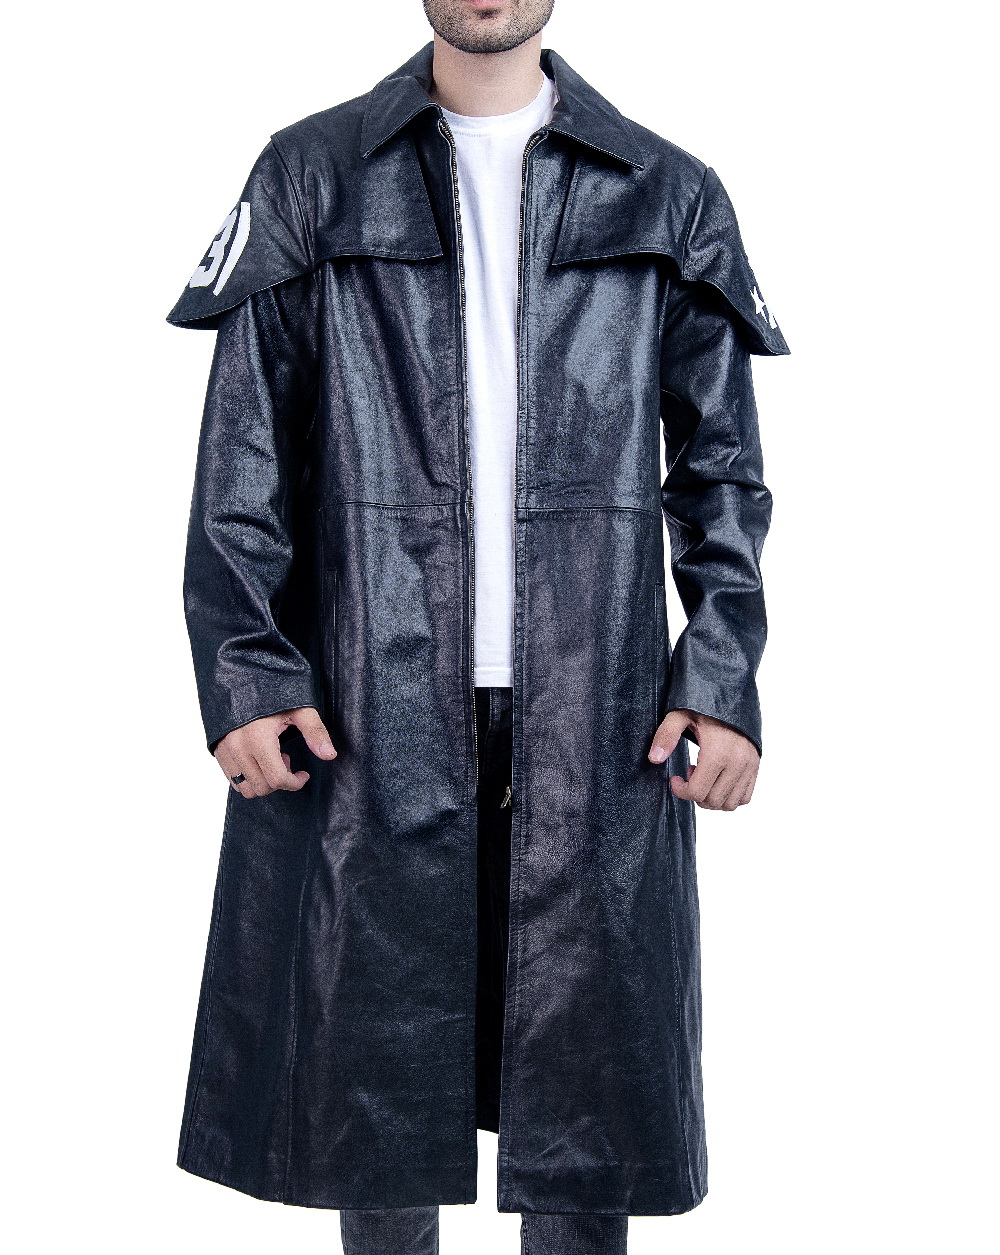 Destructive A7 Black Leather Duster Trench Coat